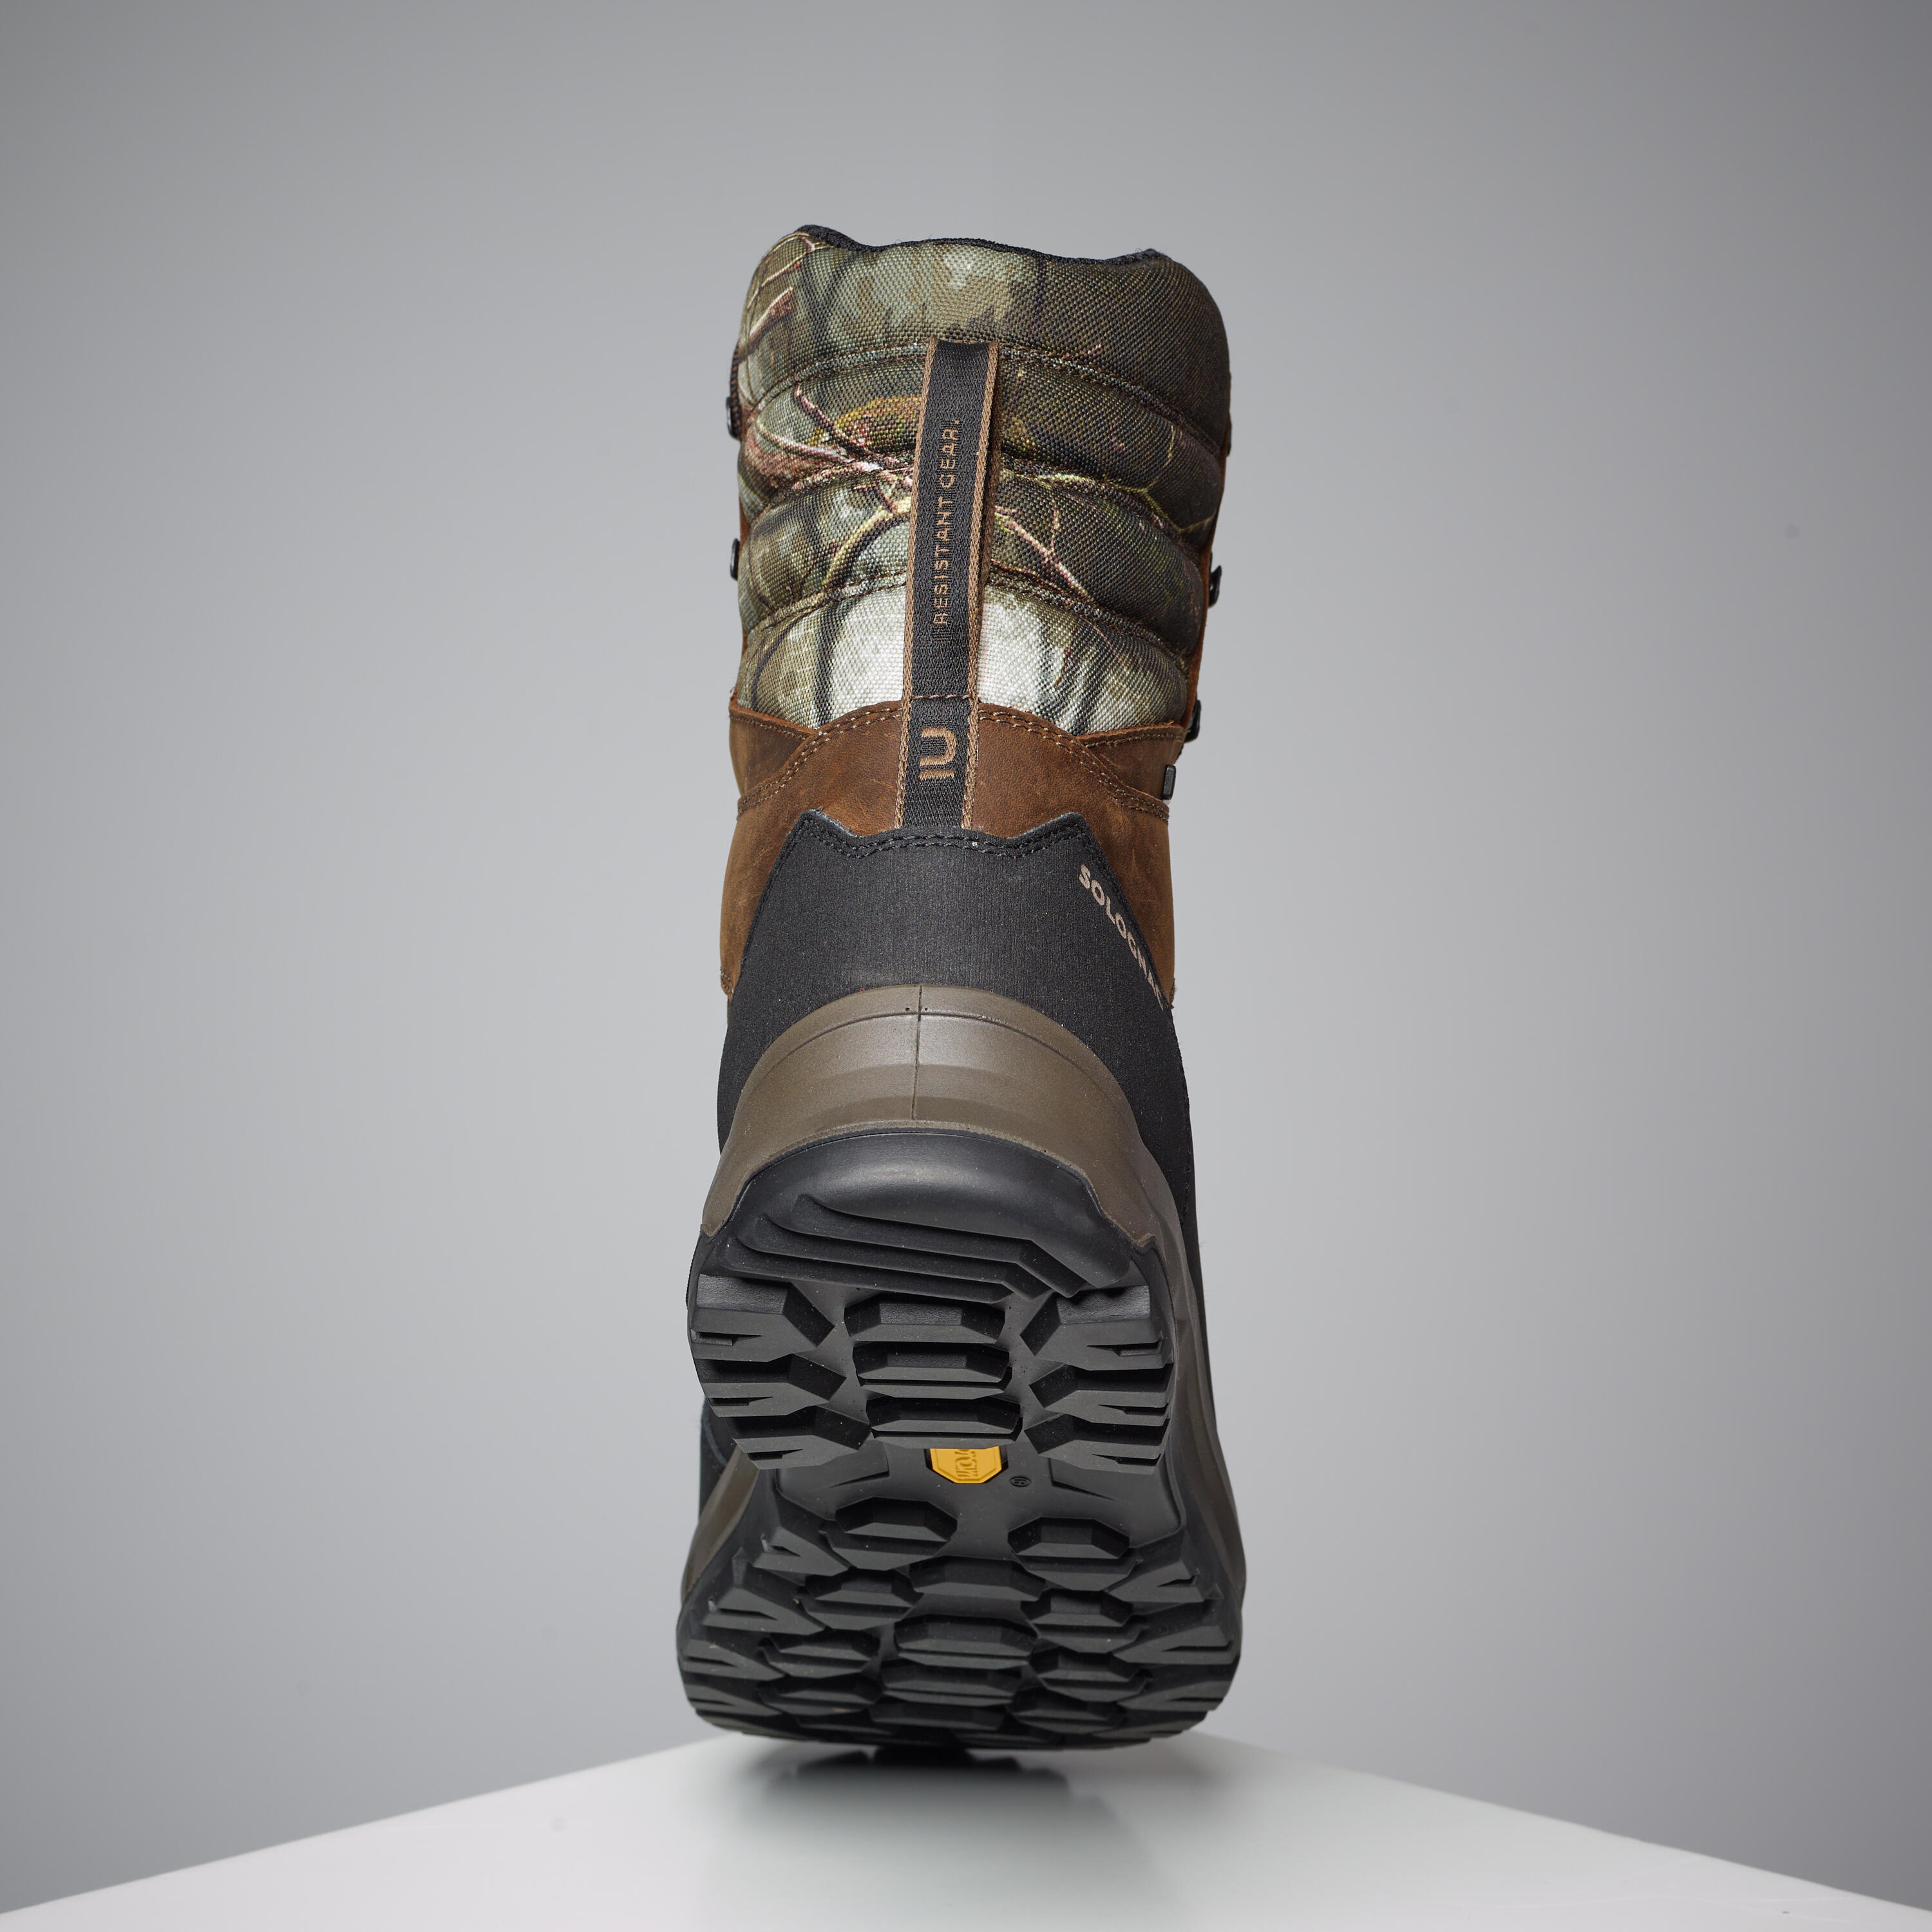 HUNTING BOOTS WARM WATERPROOF CAMOUFLAGE CROSSHUNT 540 3/5